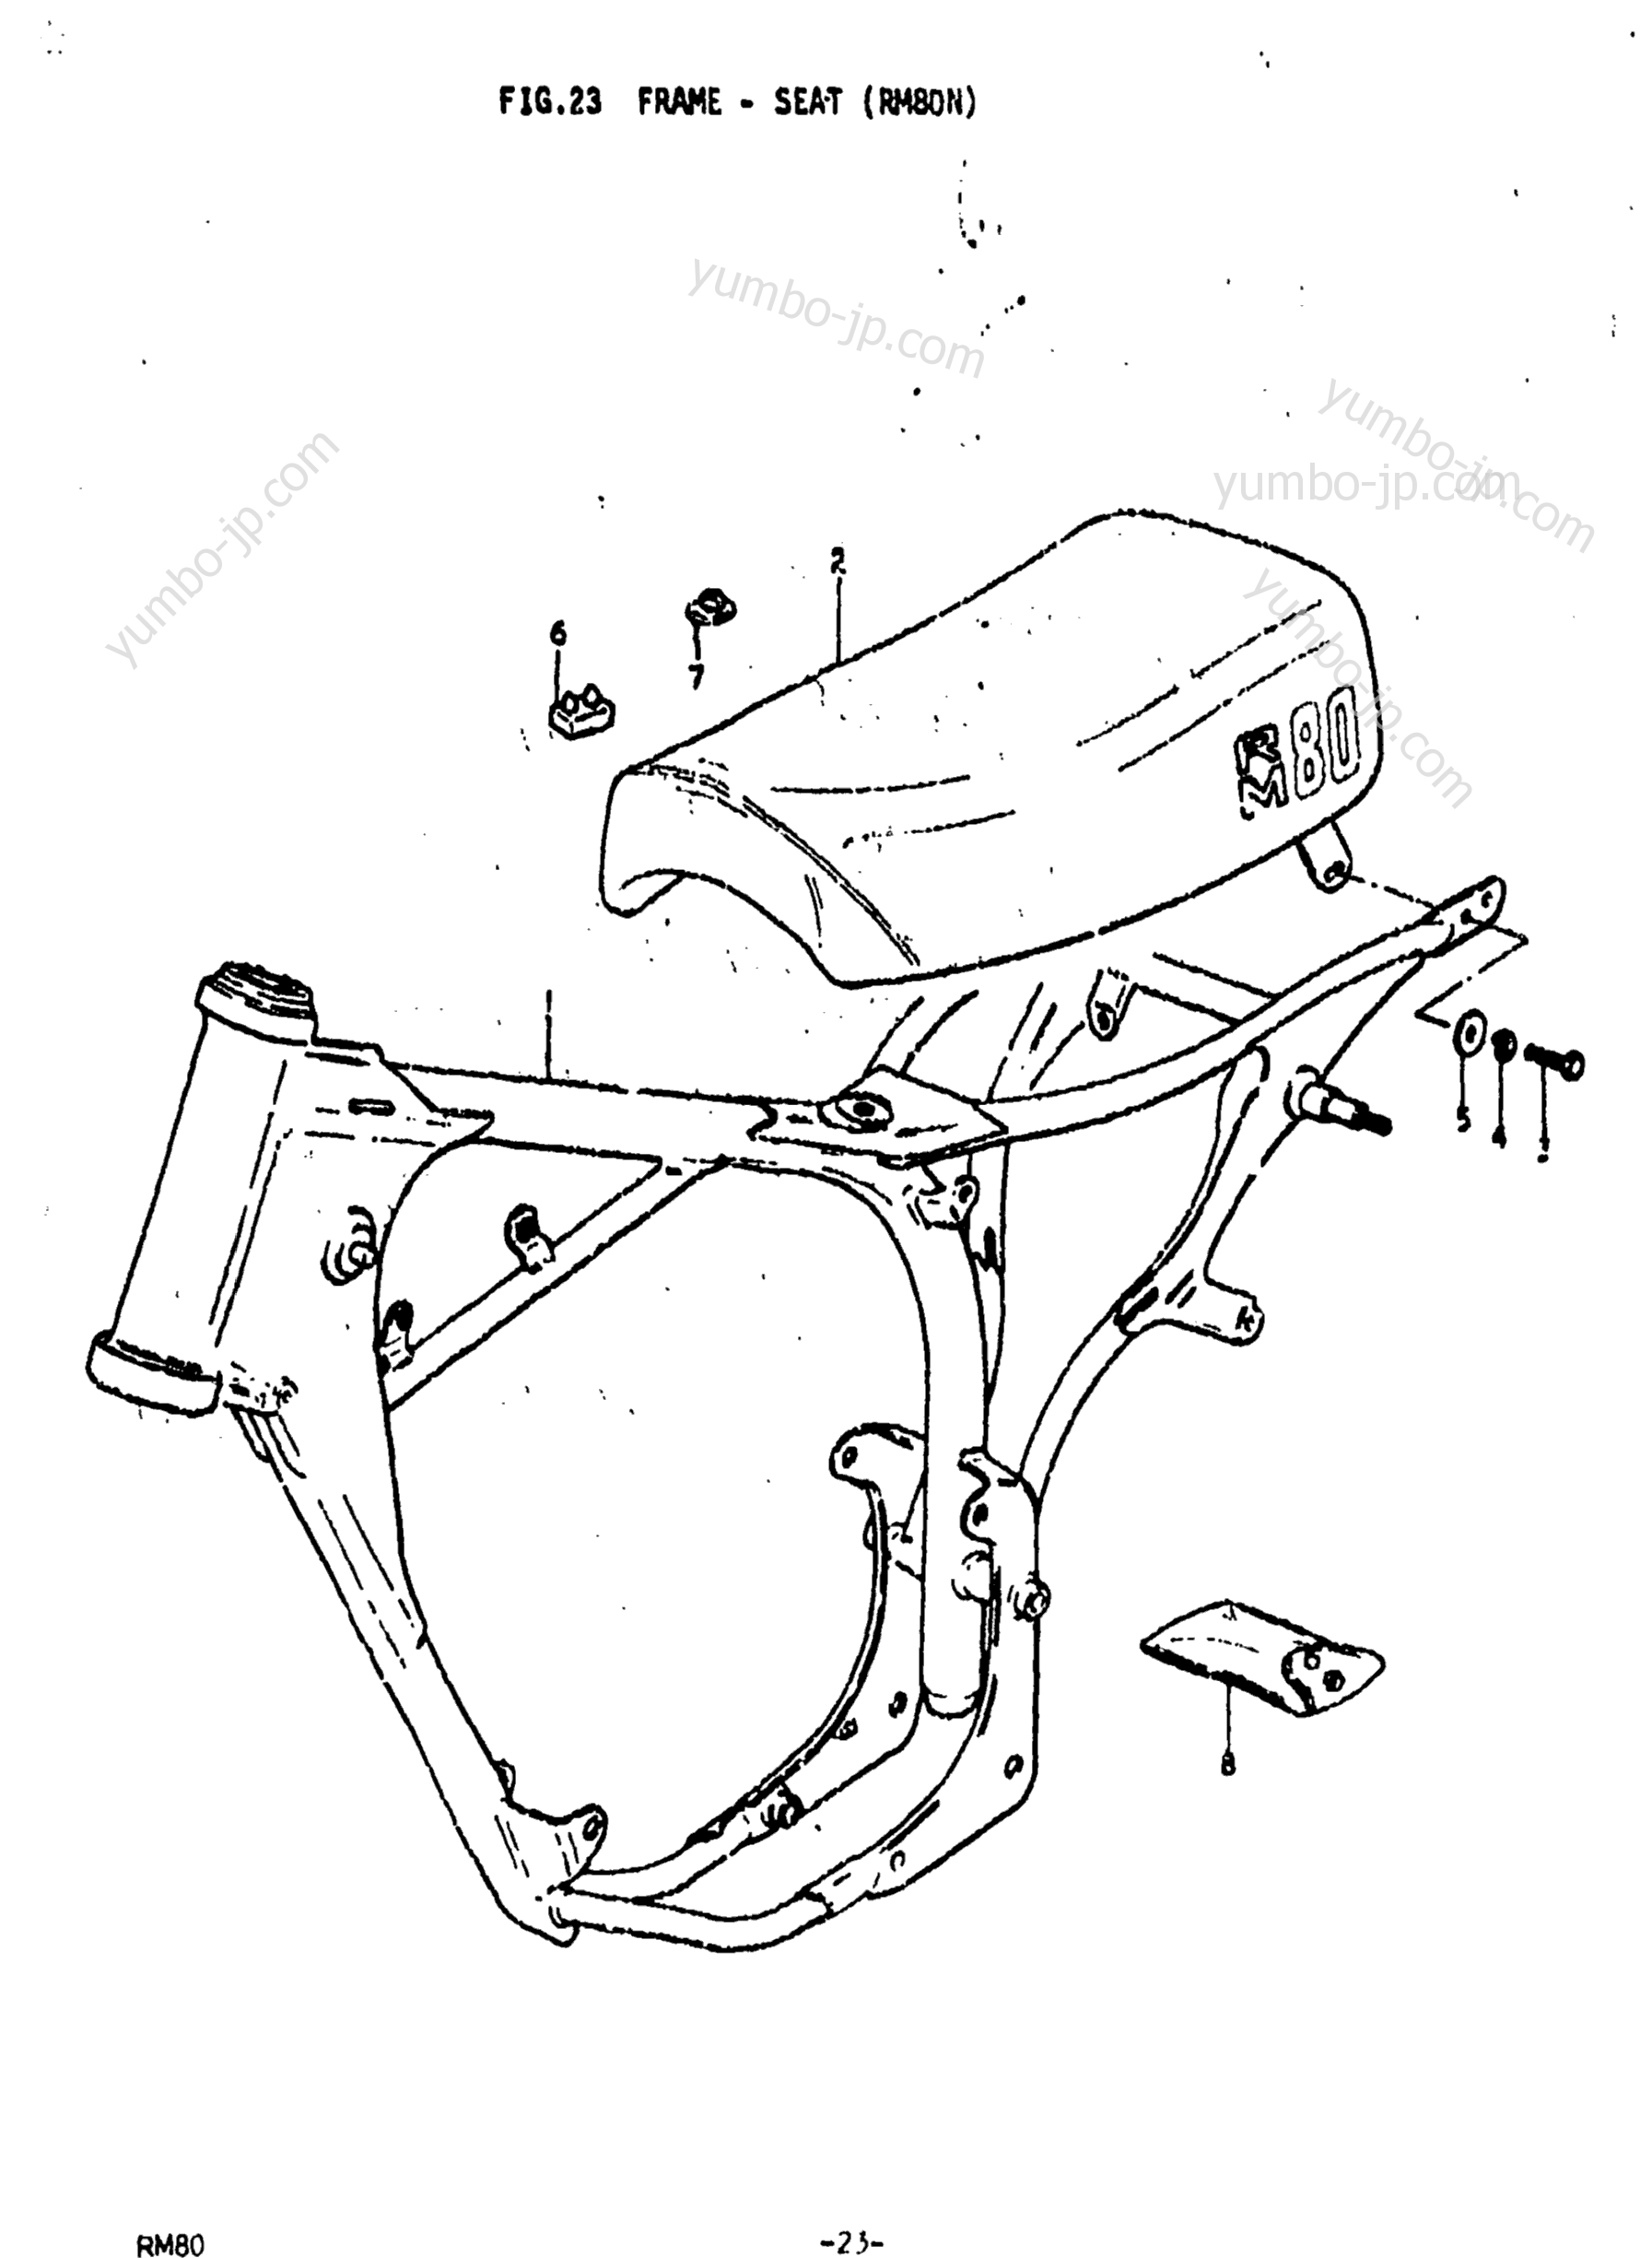 FRAME - SEAT (RM80N) for motorcycles SUZUKI RM80 1978 year